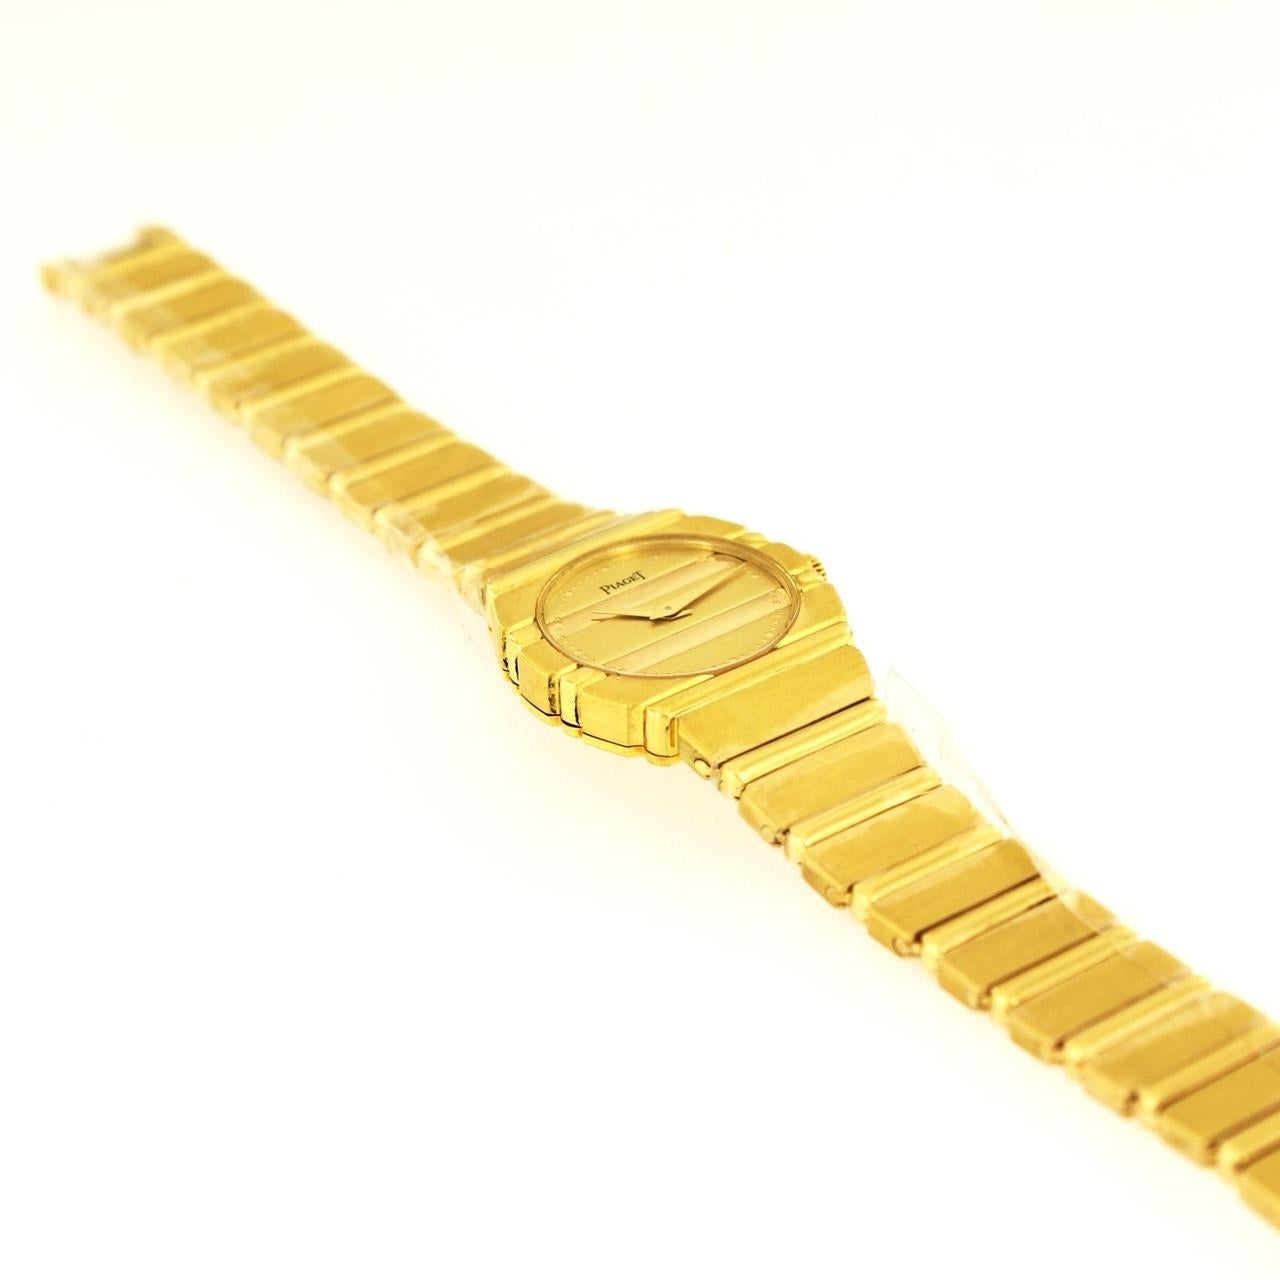 PIAGET LADIES POLO 18K YELLOW GOLD WATCH 861C701

- Condition: Mint
- Brand: Piaget
- Movement: Swiss Quartz
- Case Material: 18K Yellow Gold
- Weight: 85.9gr
- Display: Analog
- Dial Color: Gold
- Case Size: 24 mm
- Case Shape: Round
- Wrist Size: